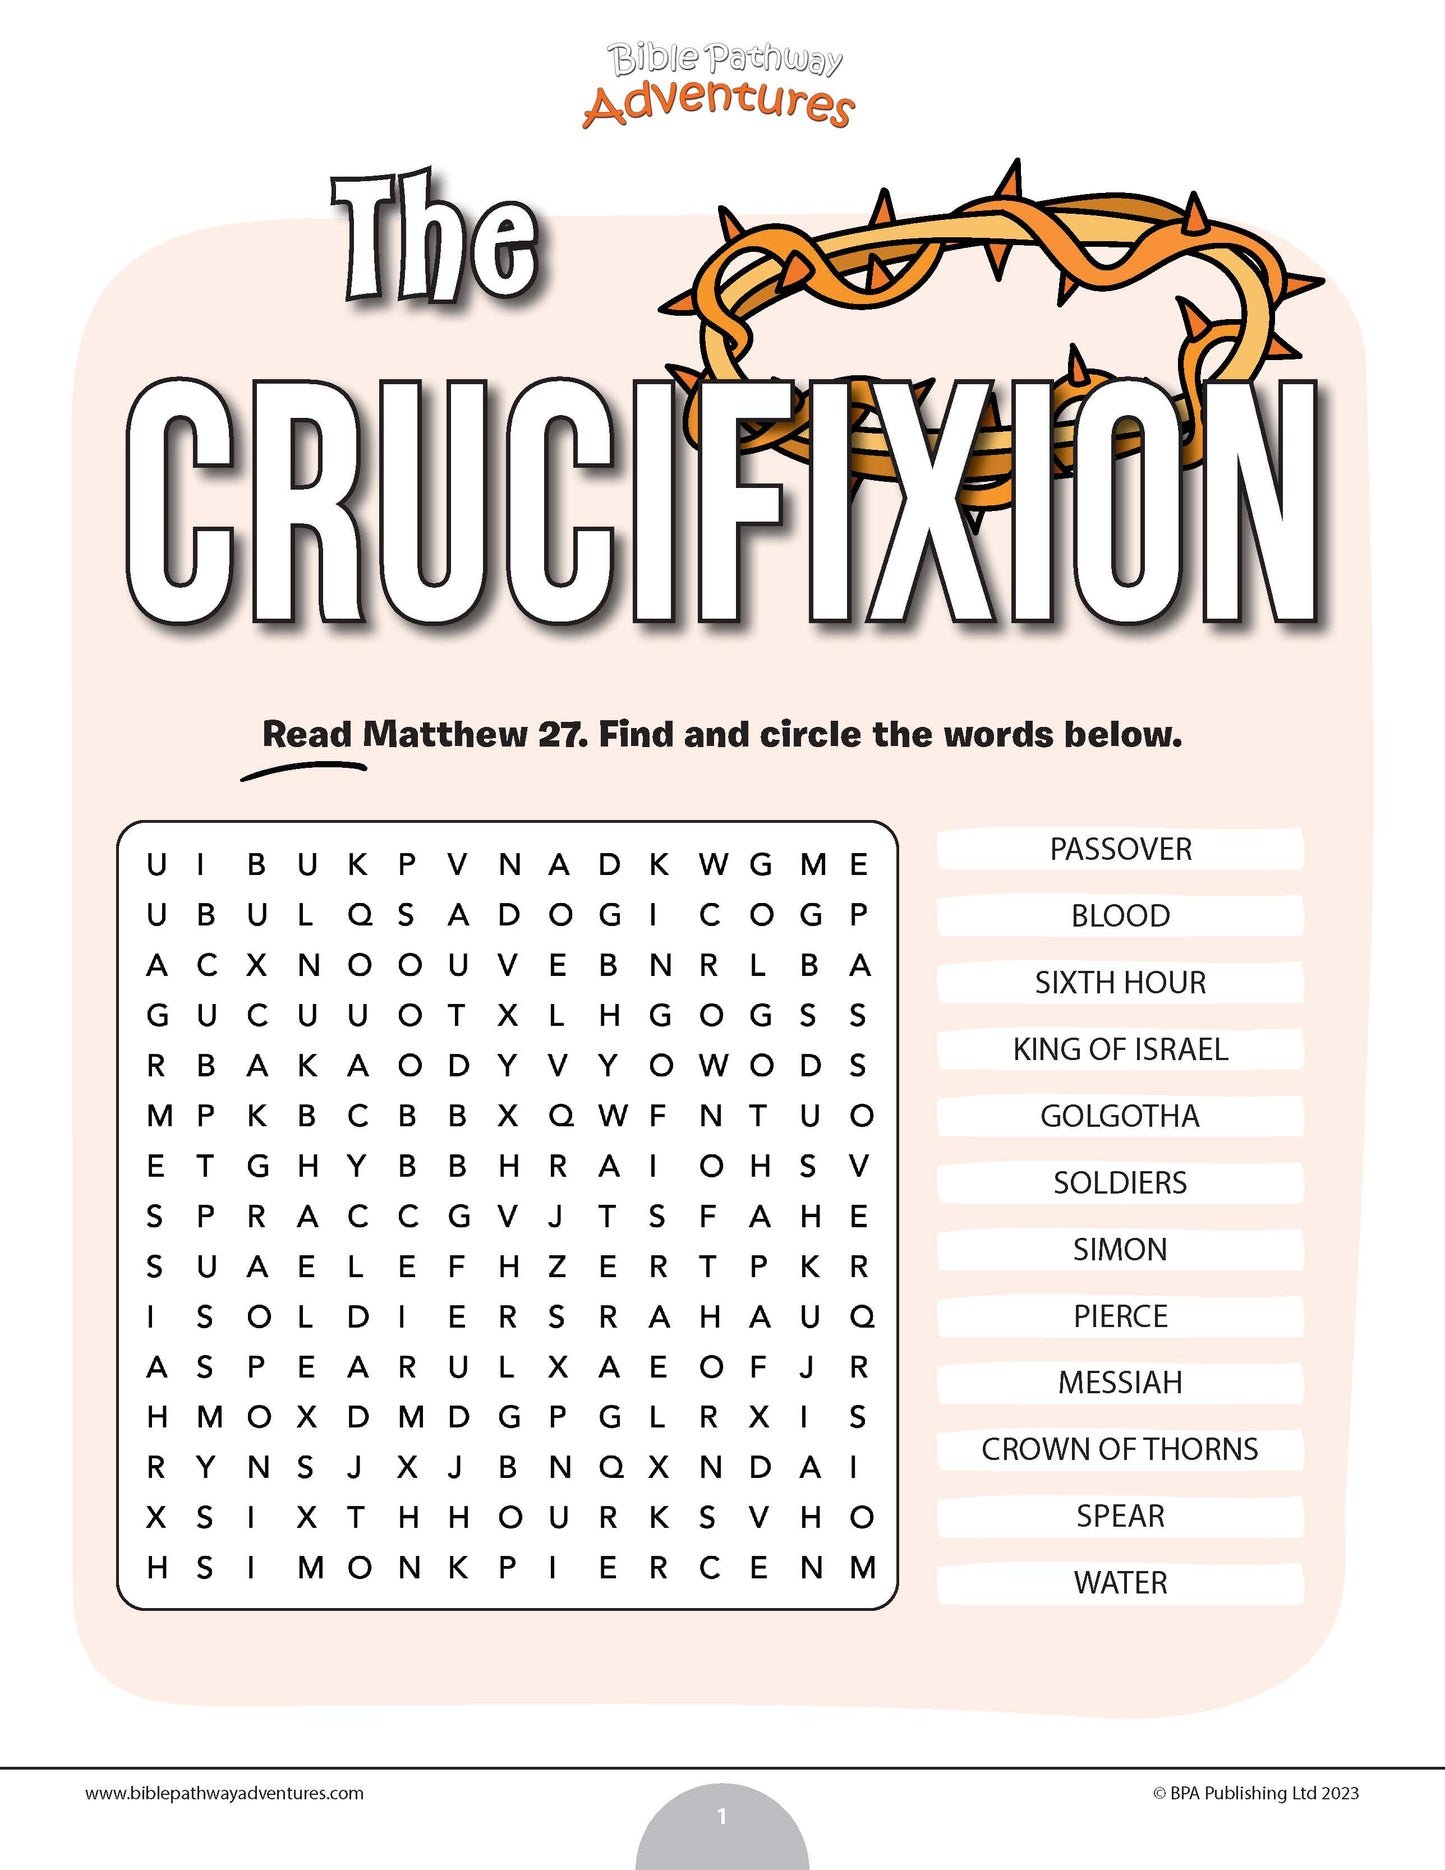 The Crucifixion word search